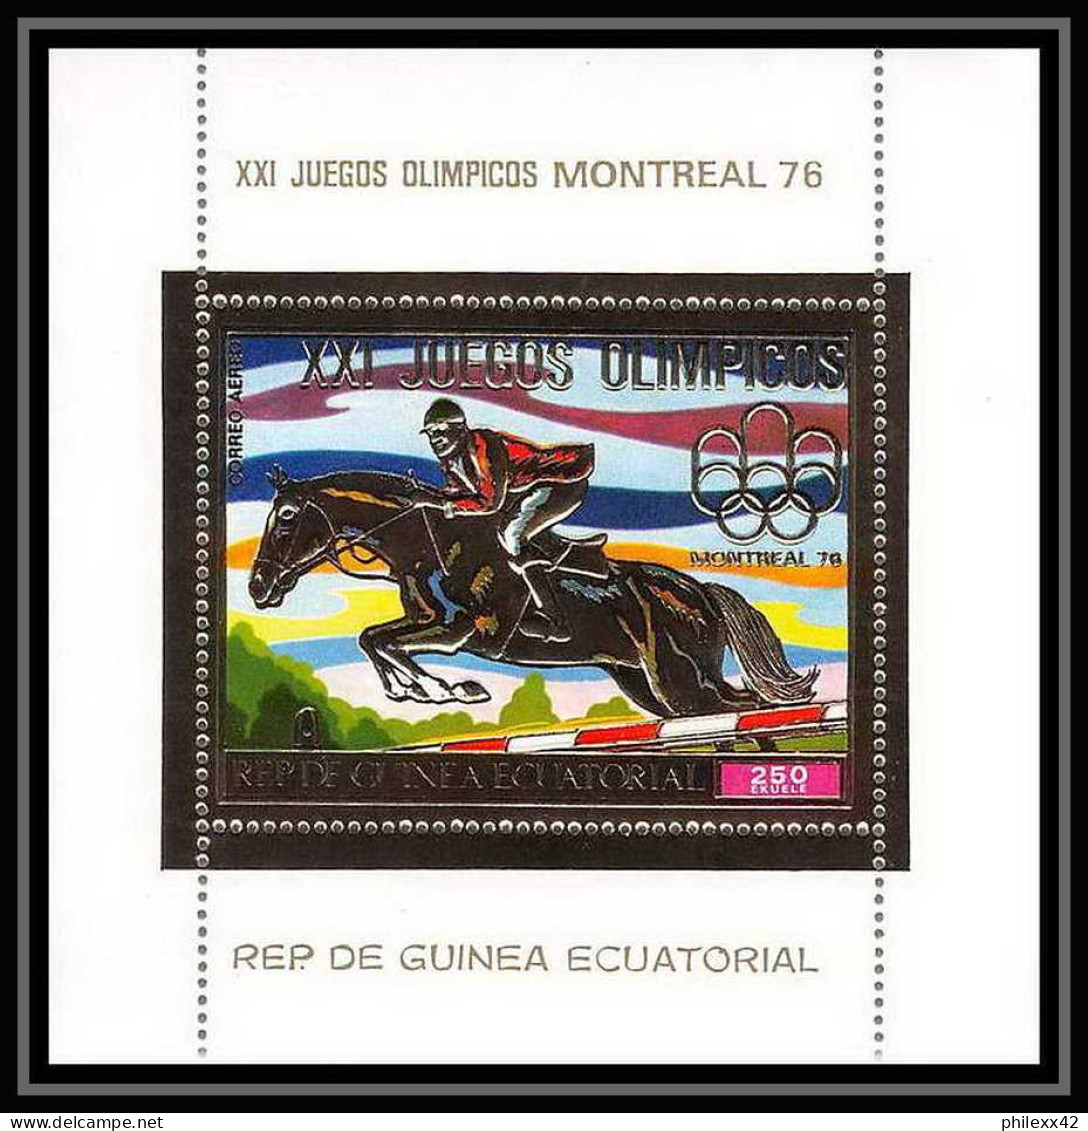 198 Guinée équatoriale Guinea Bloc N°225 OR Gold Stamps Jeux Olympiques Olympic Games 1976 Montreal Jumping Cheval - Salto